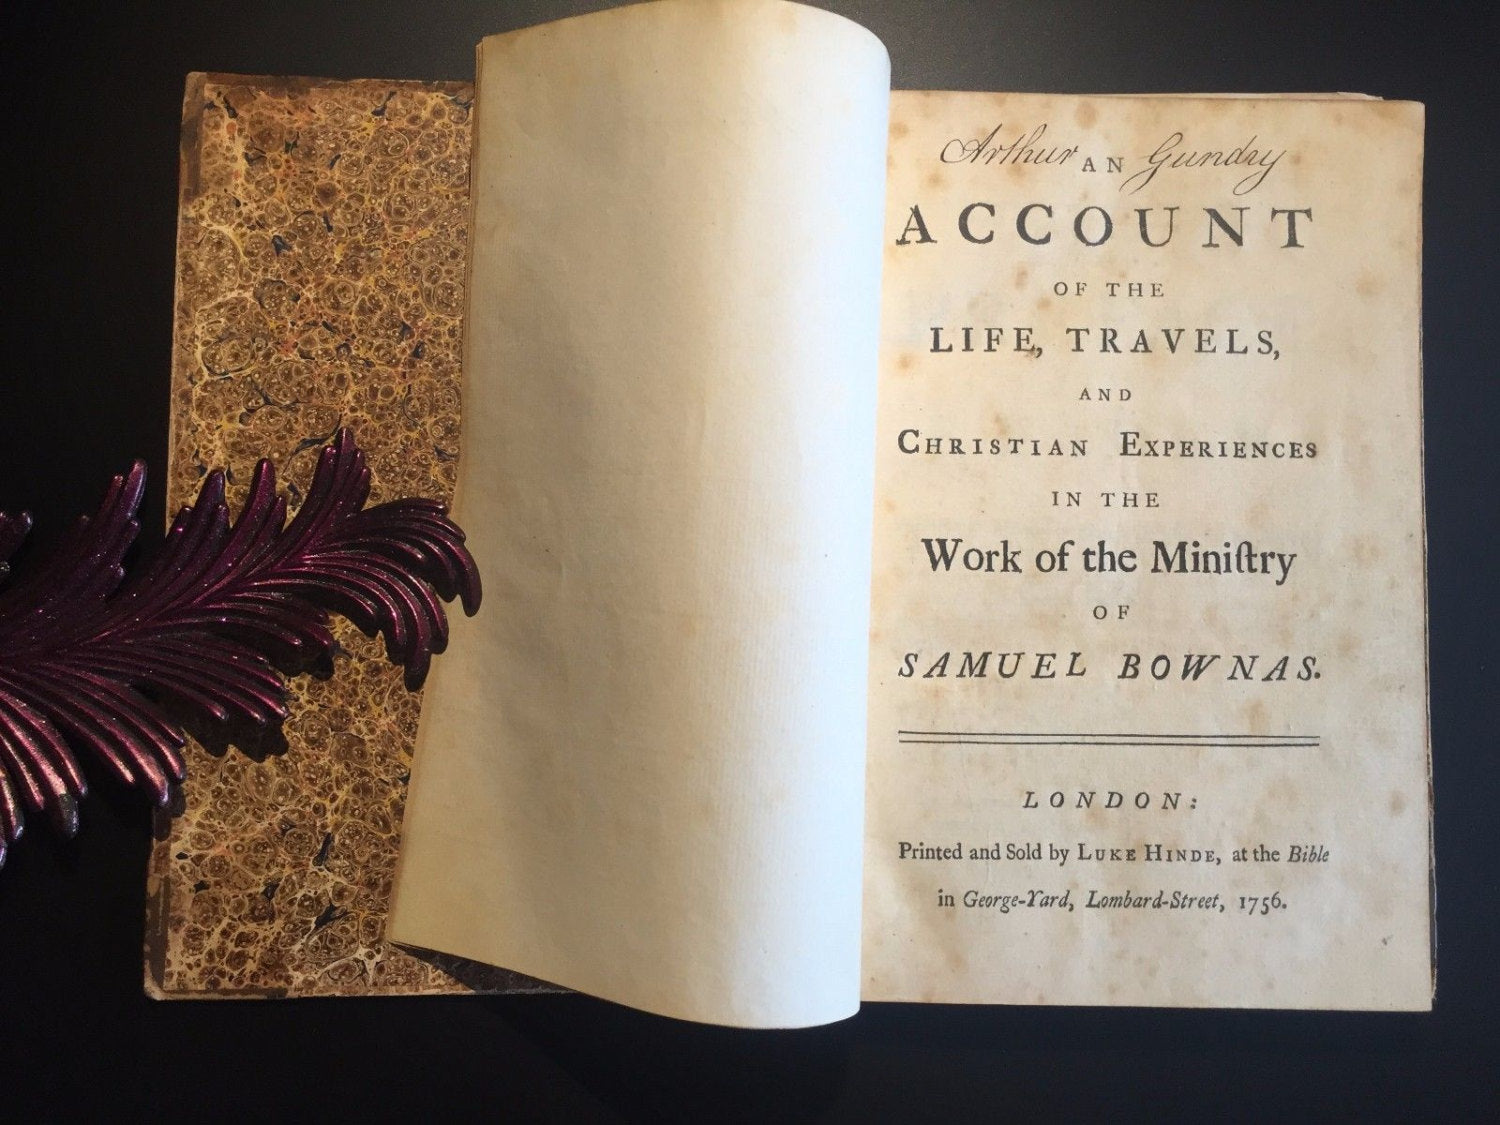 Account of the Life and Travels, Experiences, Ministry of Samuel Bownas, 1756, Rare